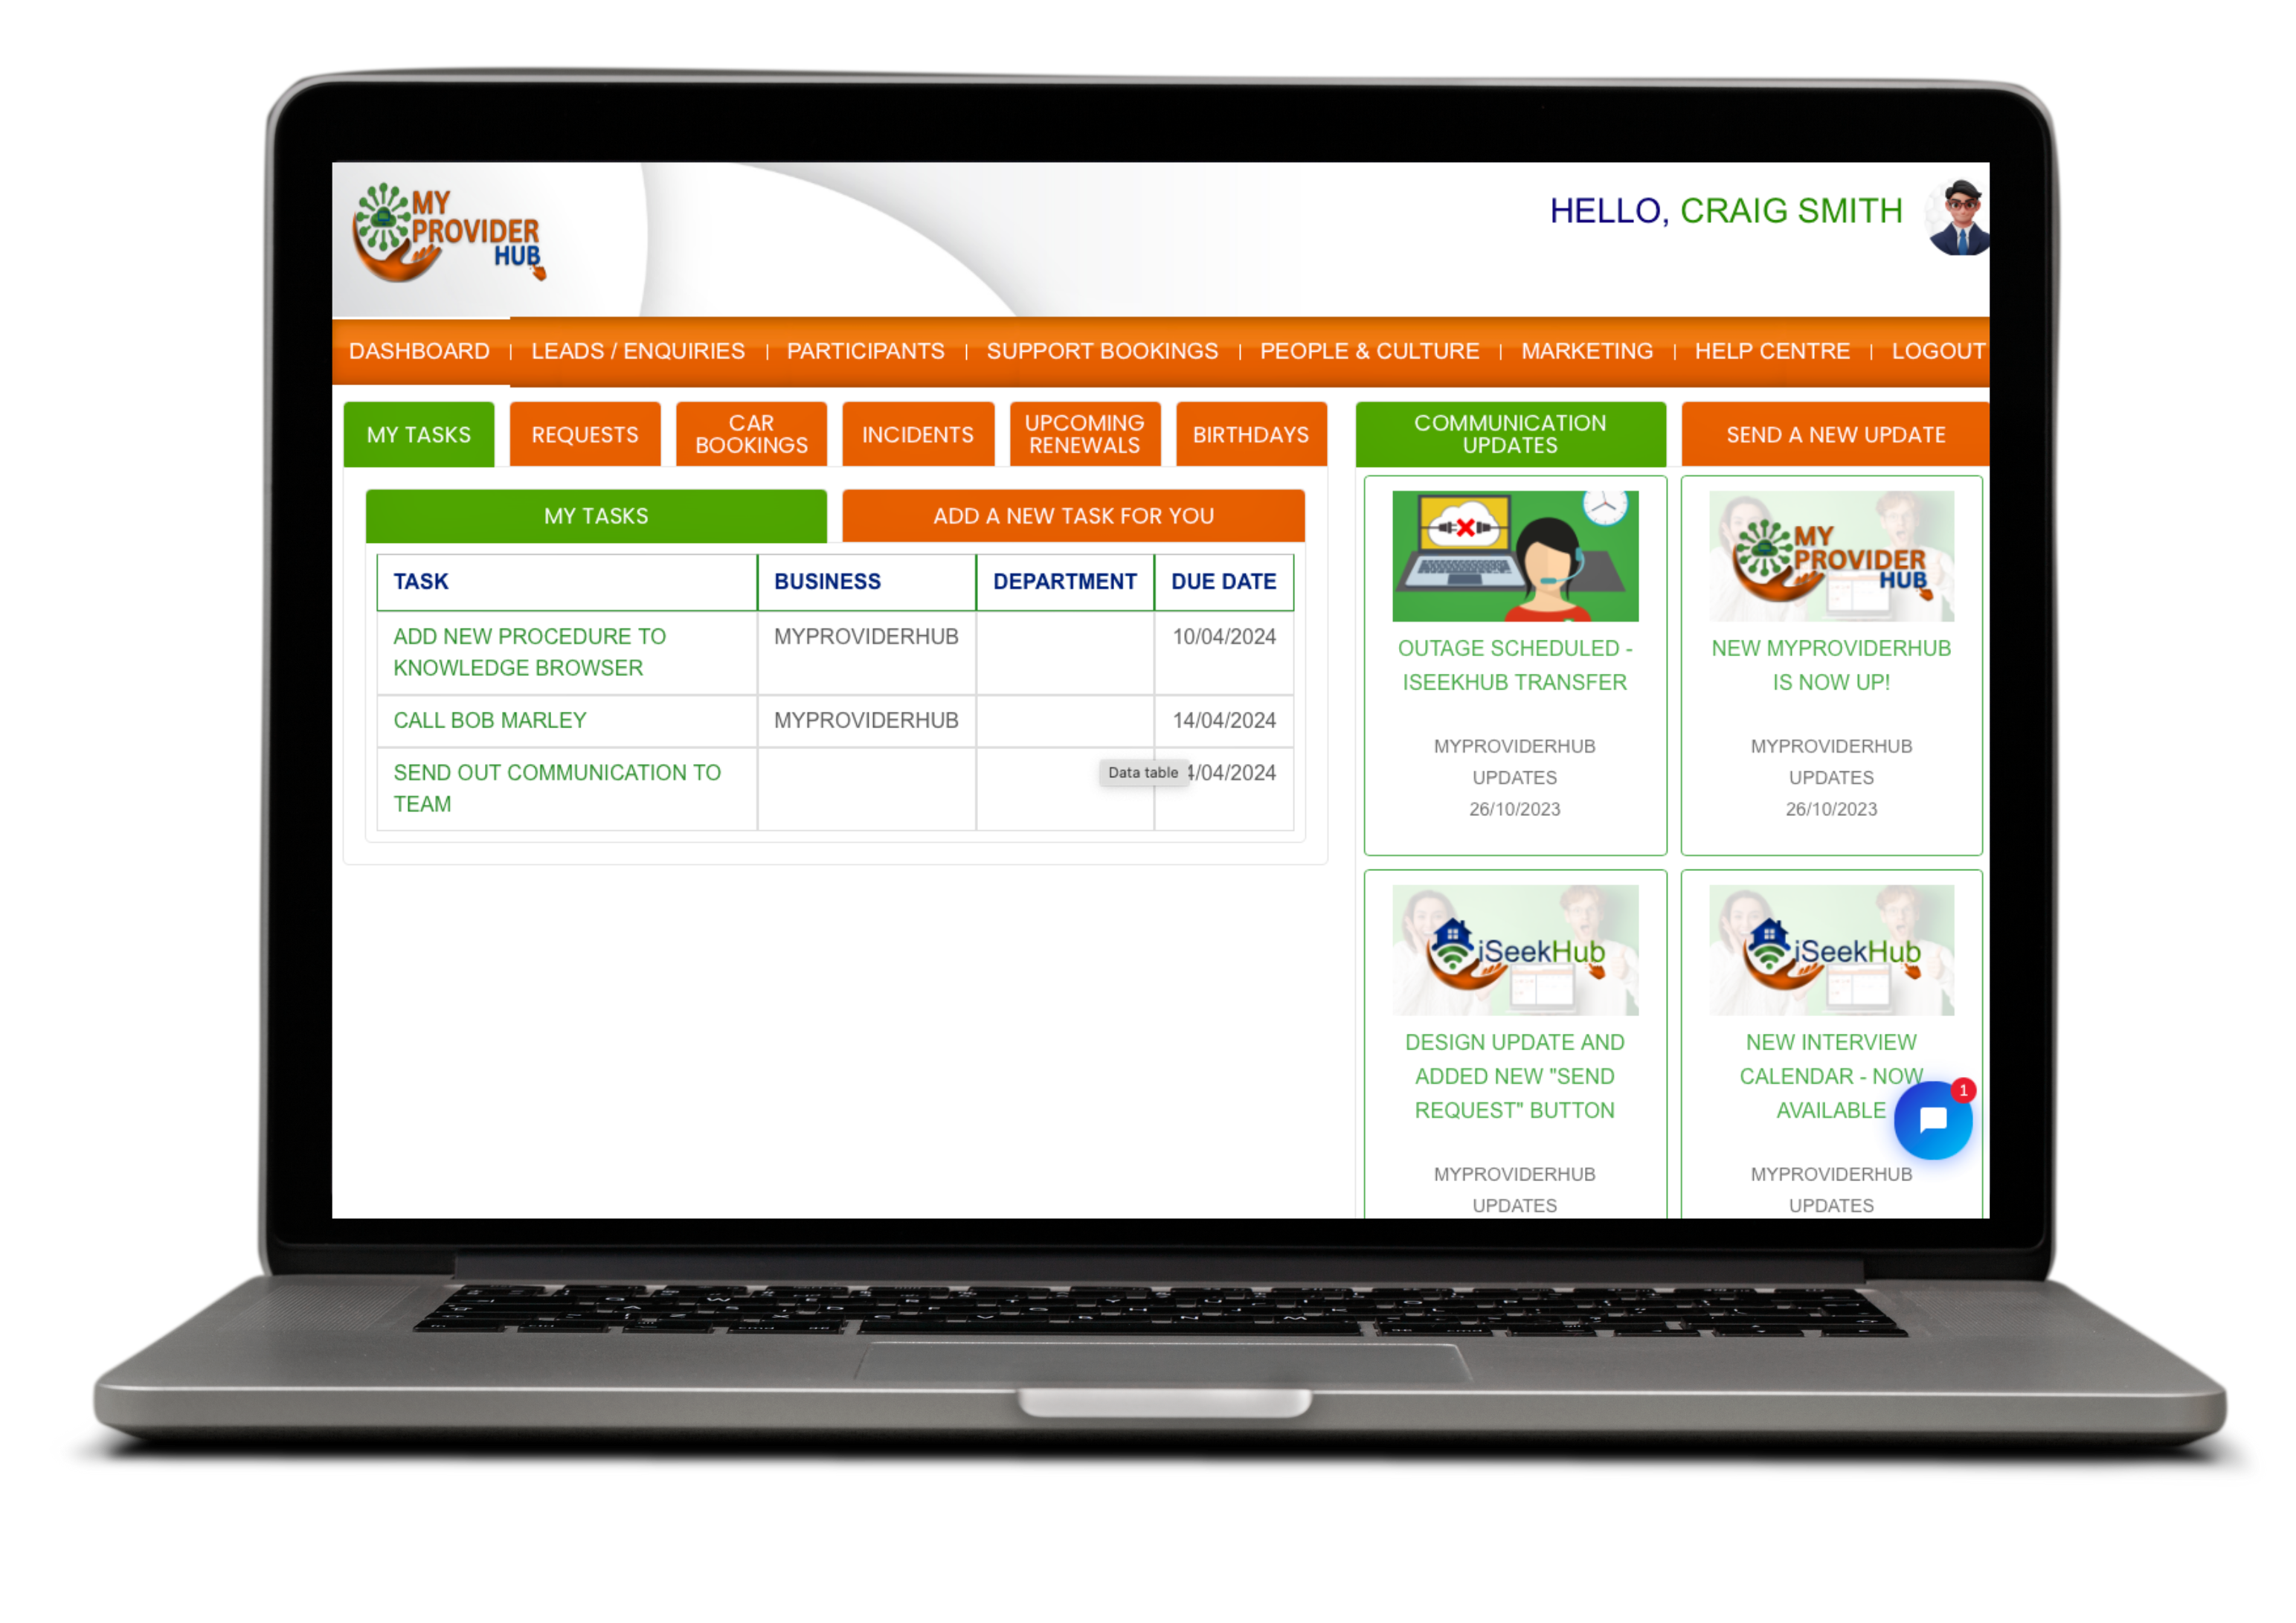 NDIS Provider Solution For Sales, Managers and Registered Nurses.